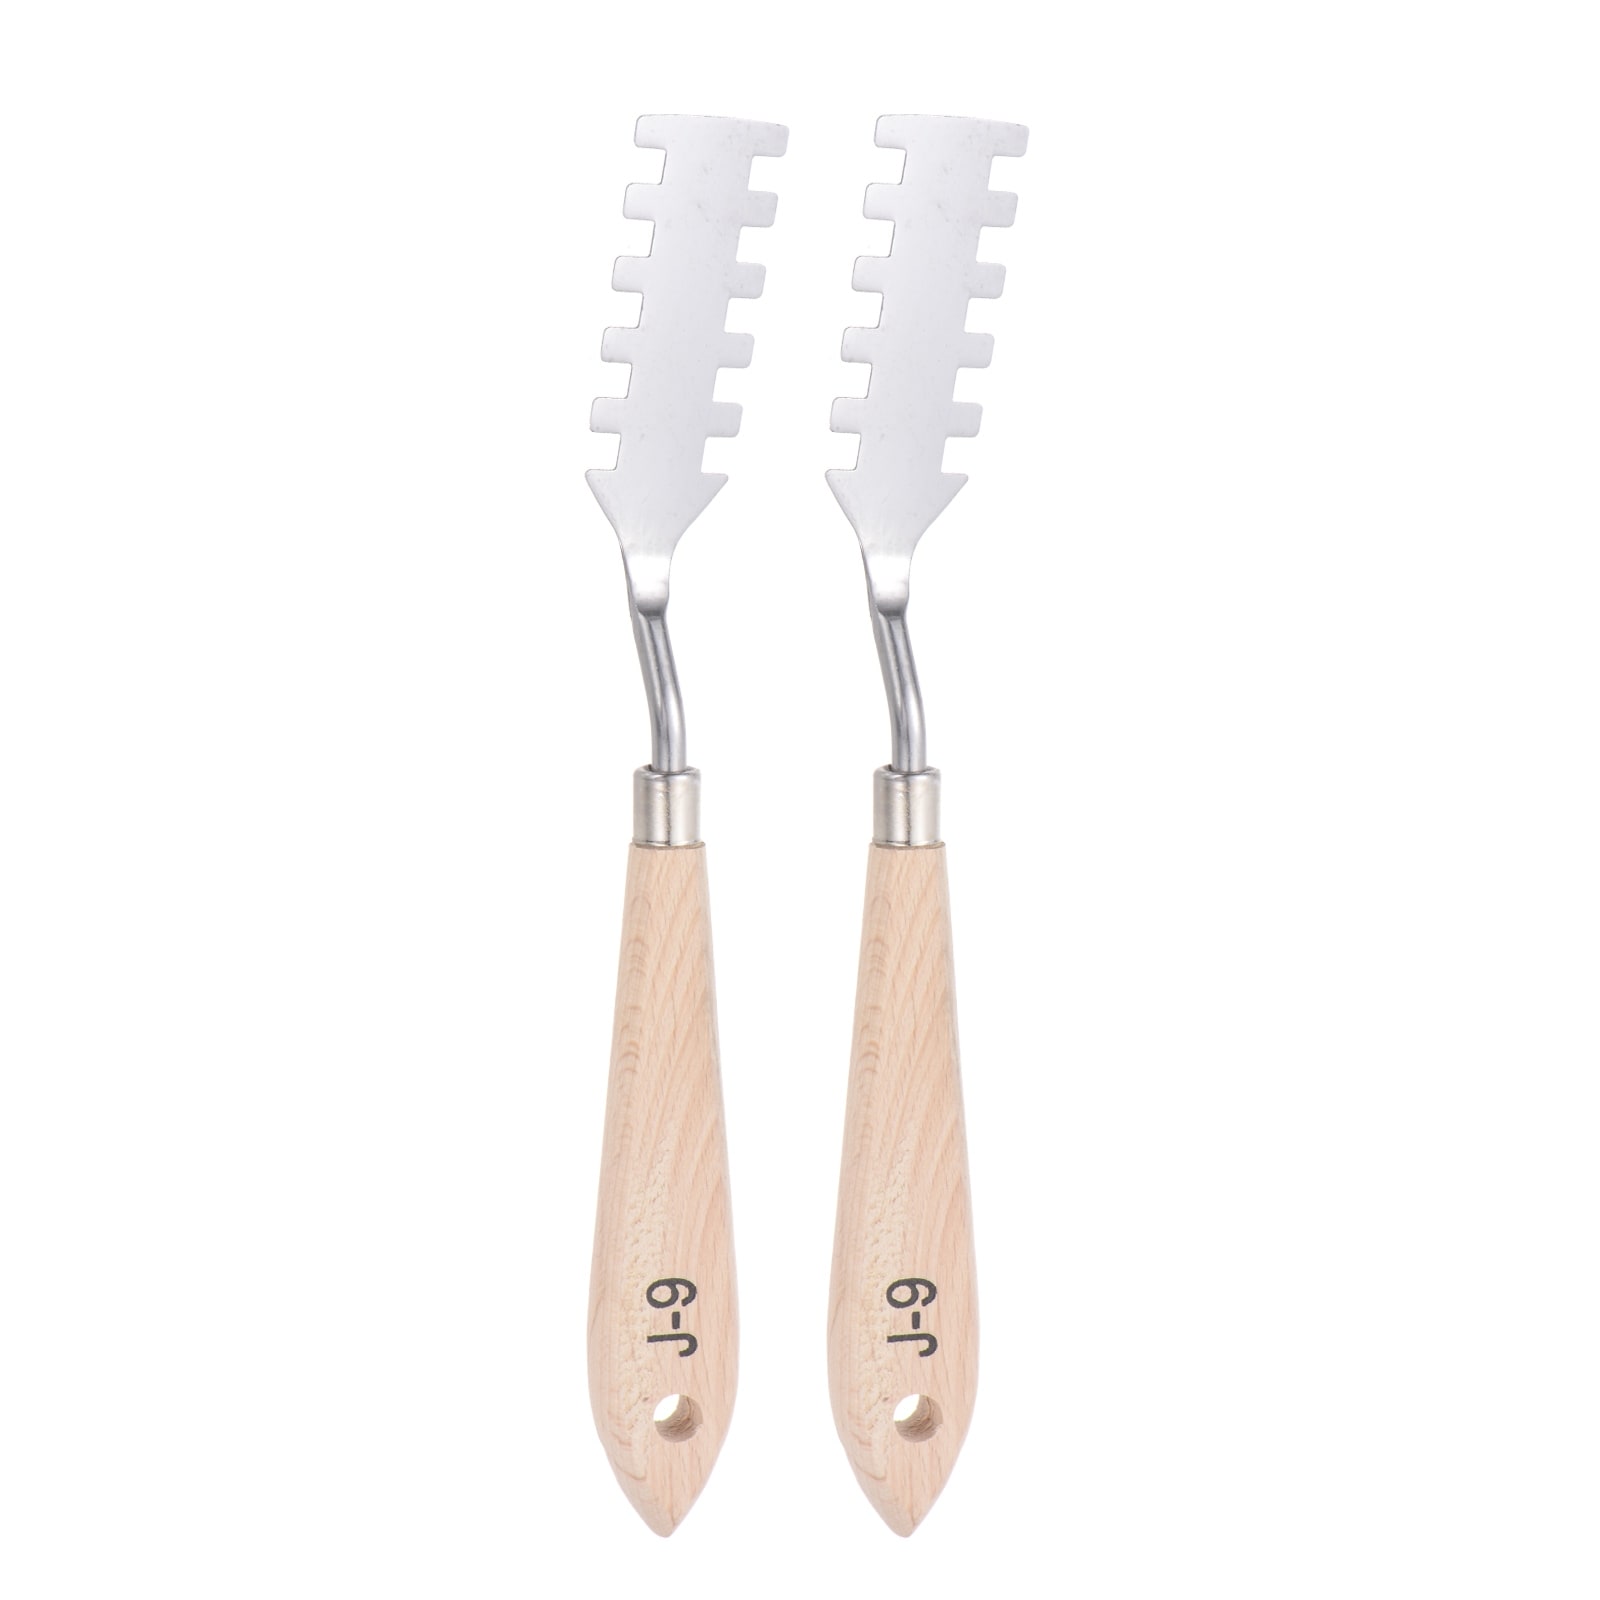 2Pcs Stainless Steel Palette Painting Knife Spatula Scraper Blade